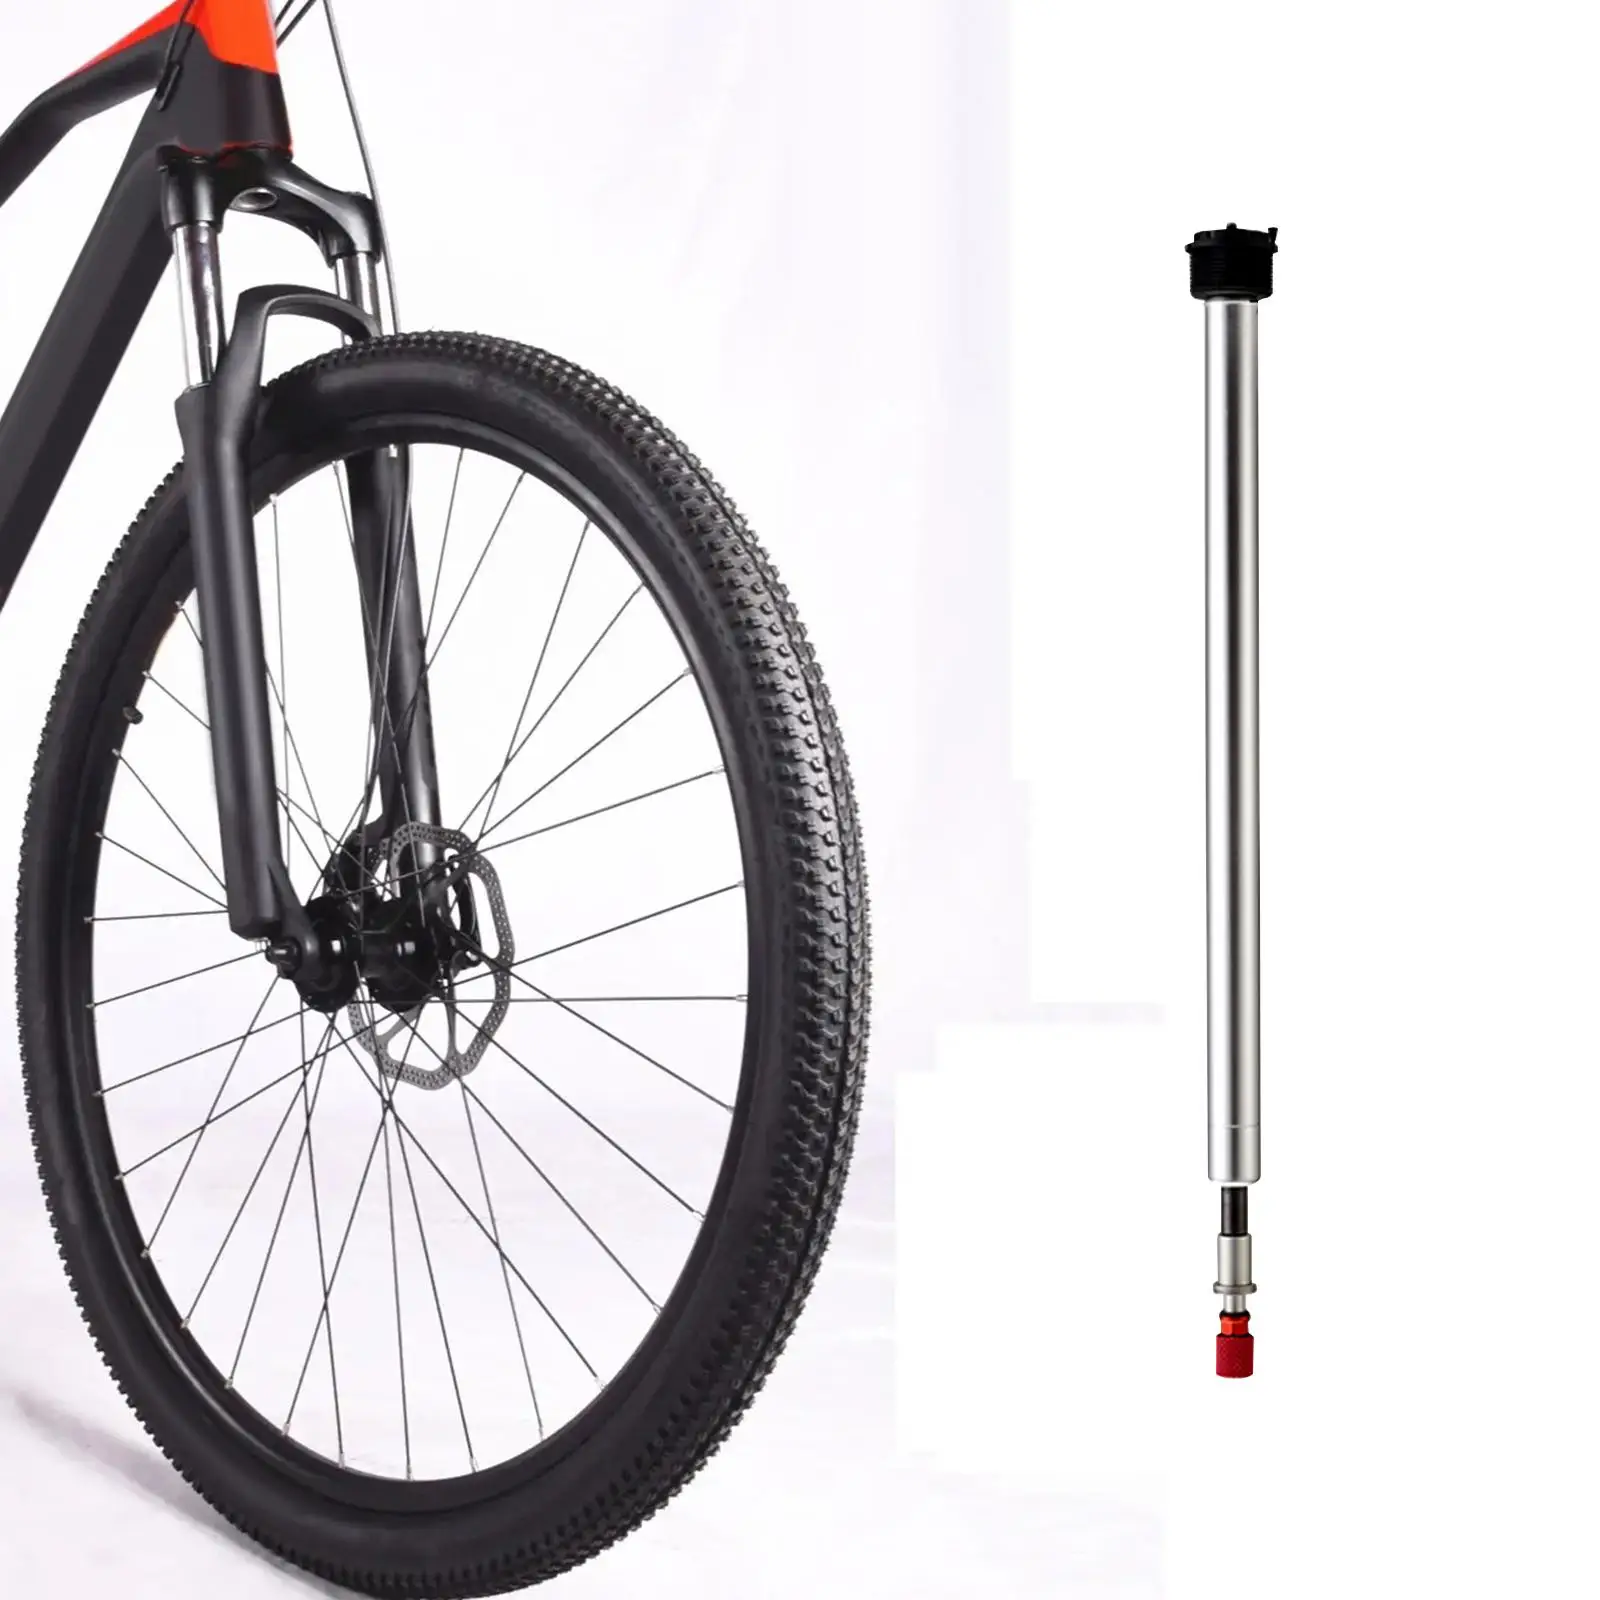 Bicycle Front Fork Repair Rod Easy to Install Bike Suspension Fork Professional Quality Air Pneumatic Rod for Mountain Bike